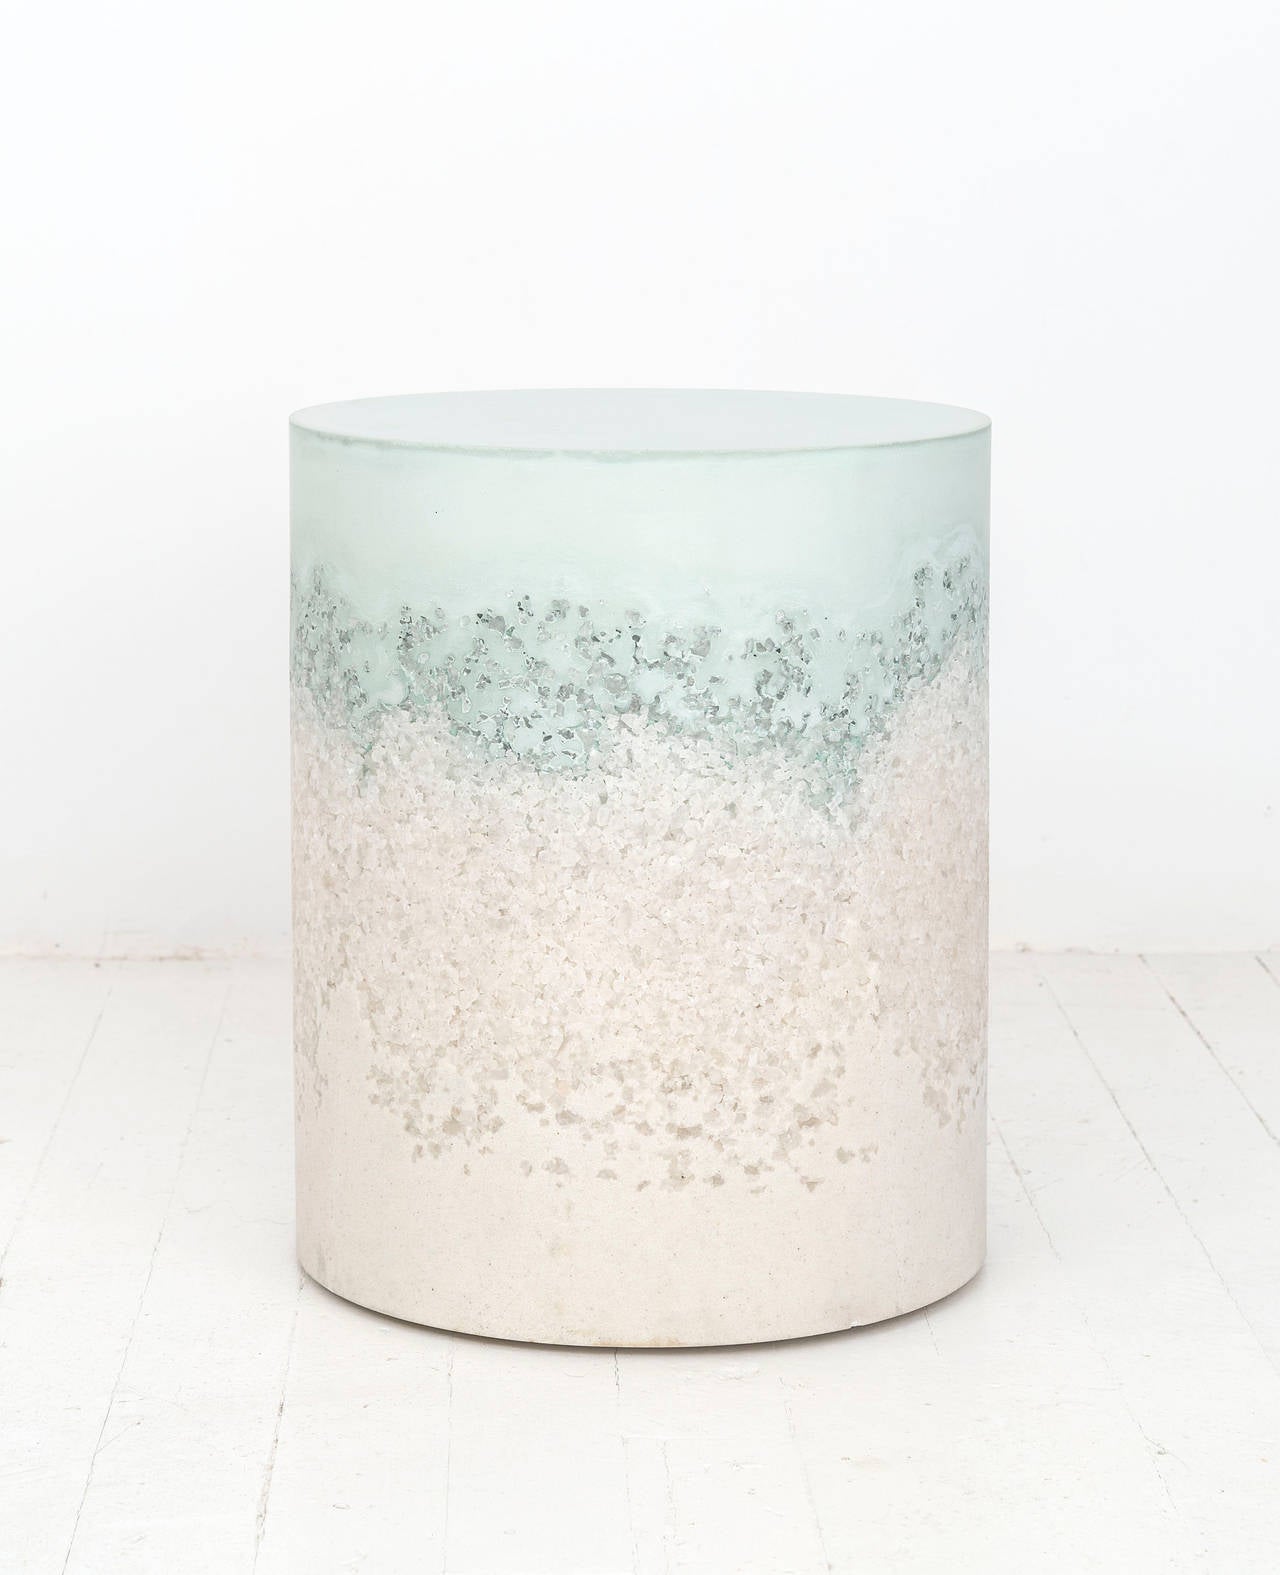 This made-to-order drum consists of a hand-dyed celadon cement top with a packed white rock salt center and a packed white sand bottom. The cement is poured by hand over the aggregates, creating an organic blend between the materials. The piece has